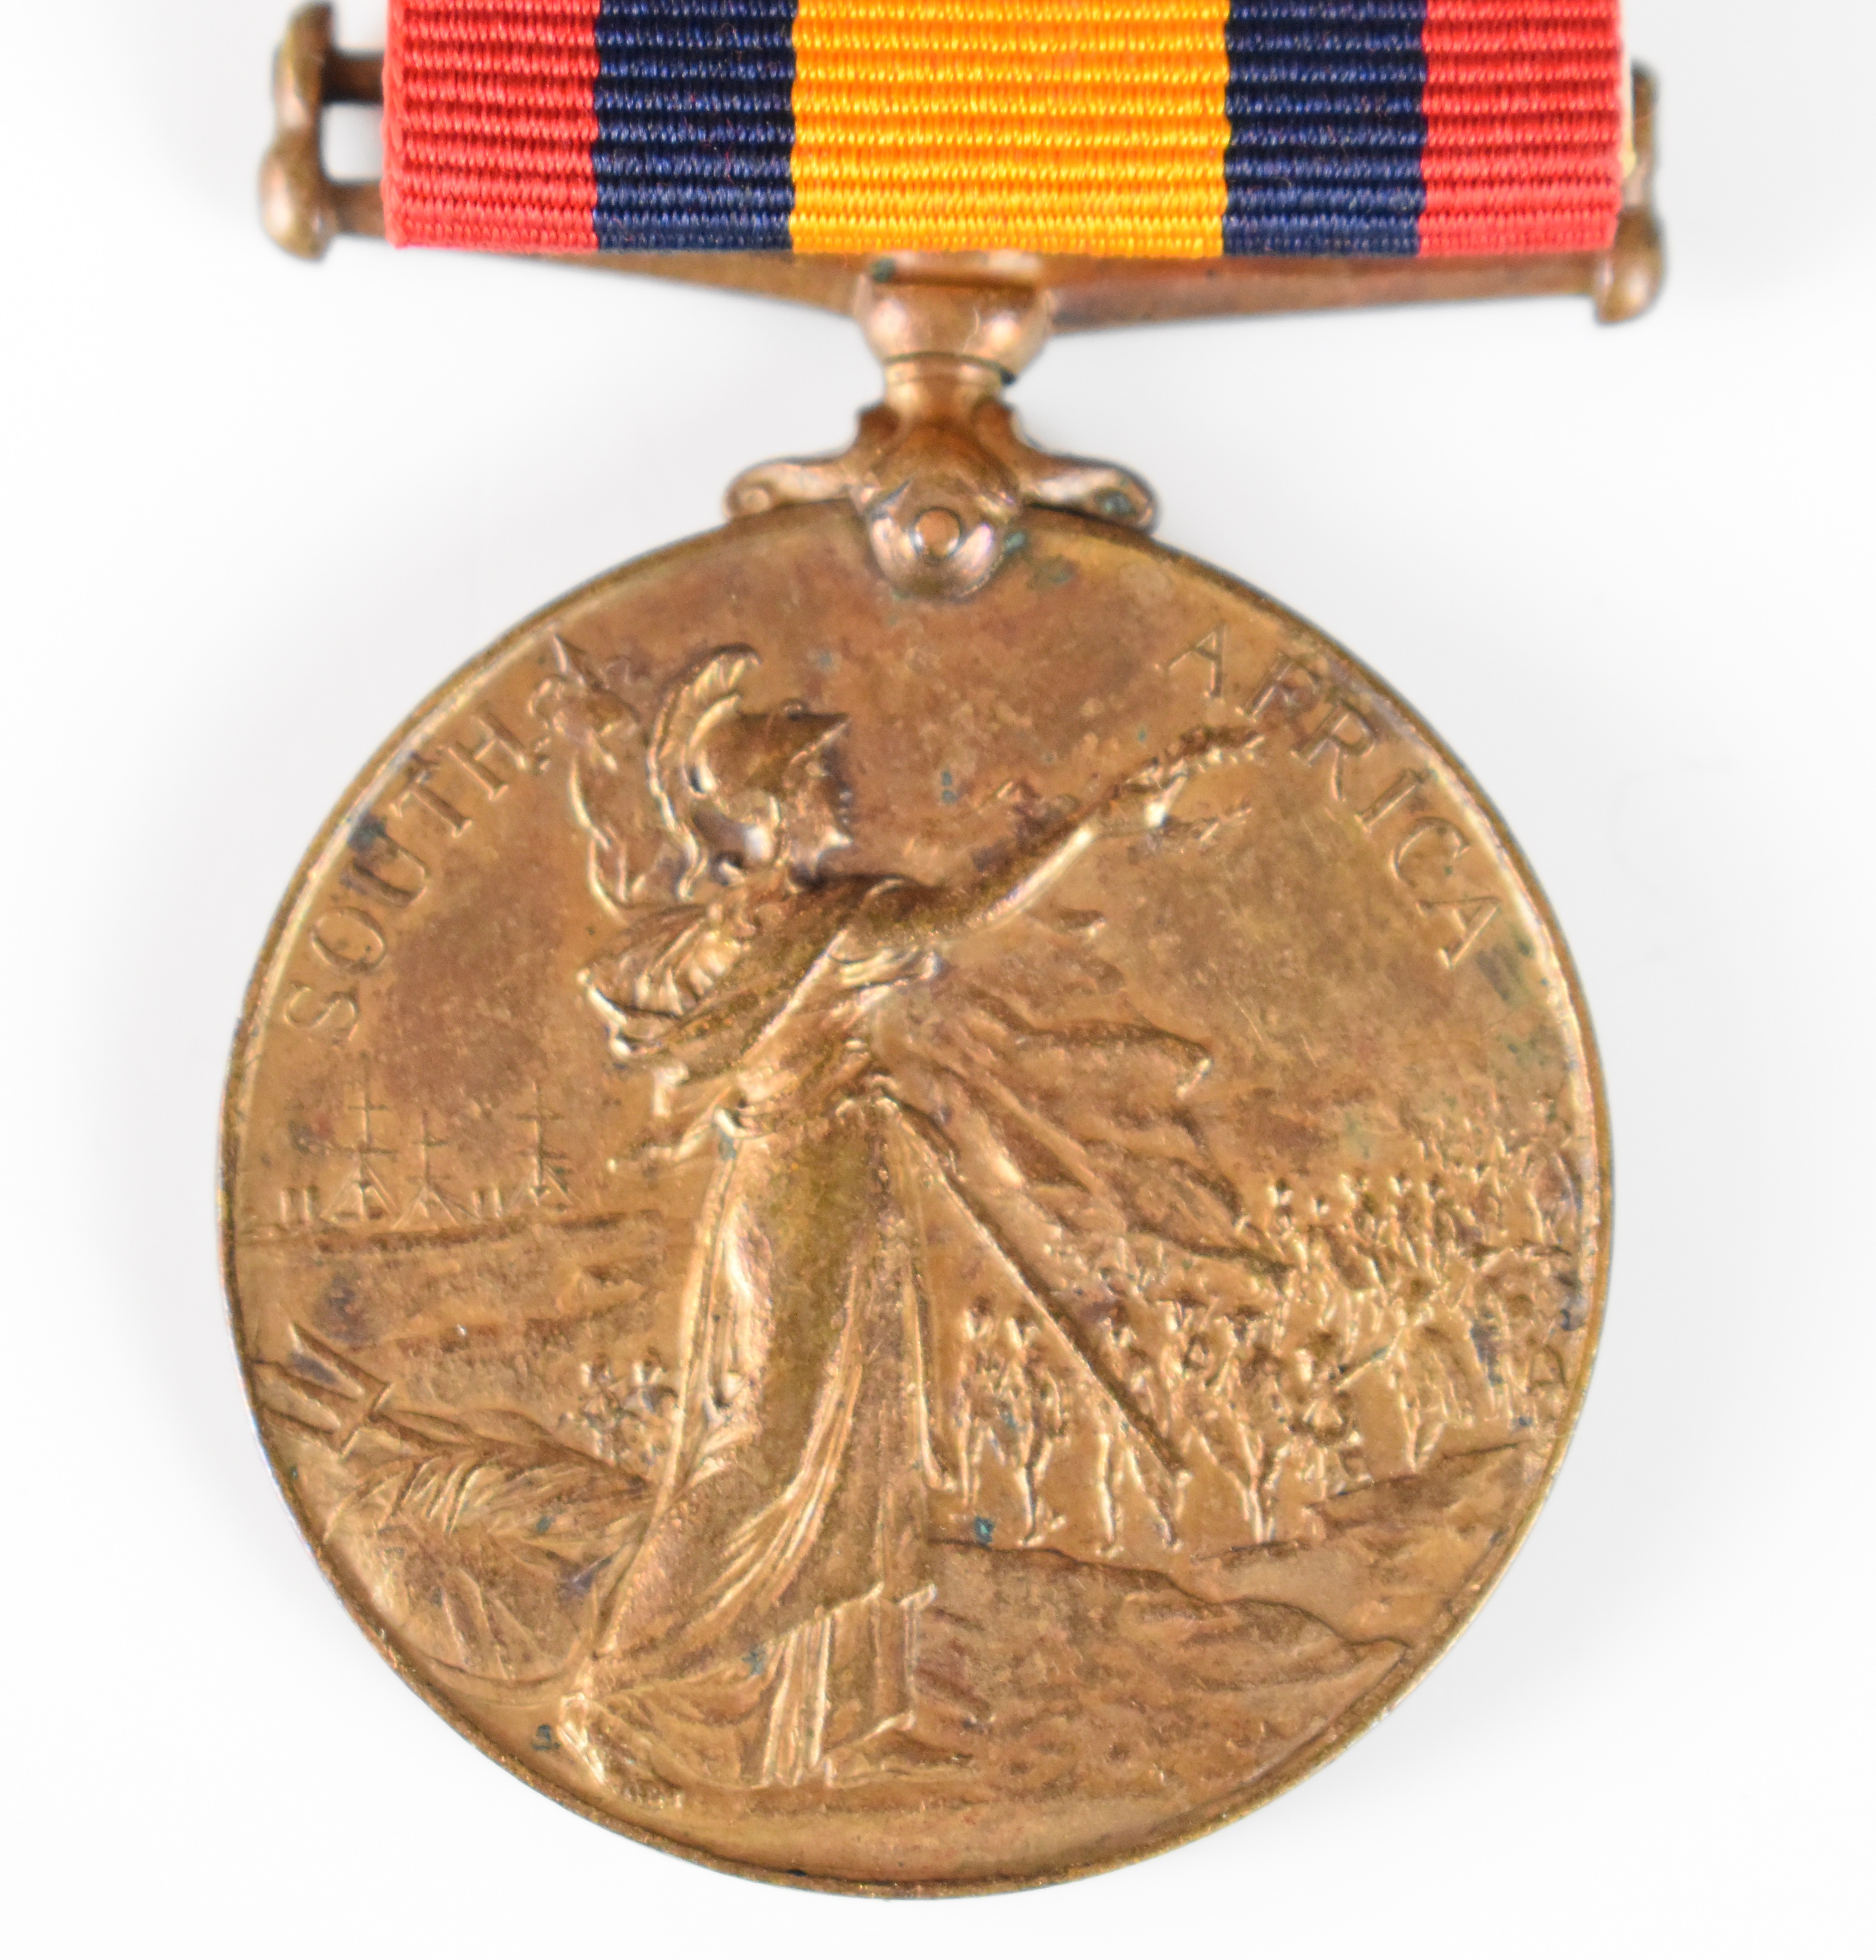 Queen's South Africa Medal in bronze, named to 657 Bhisti (Water Carrier) Gulam Muhamed, S & T Corps - Image 3 of 5